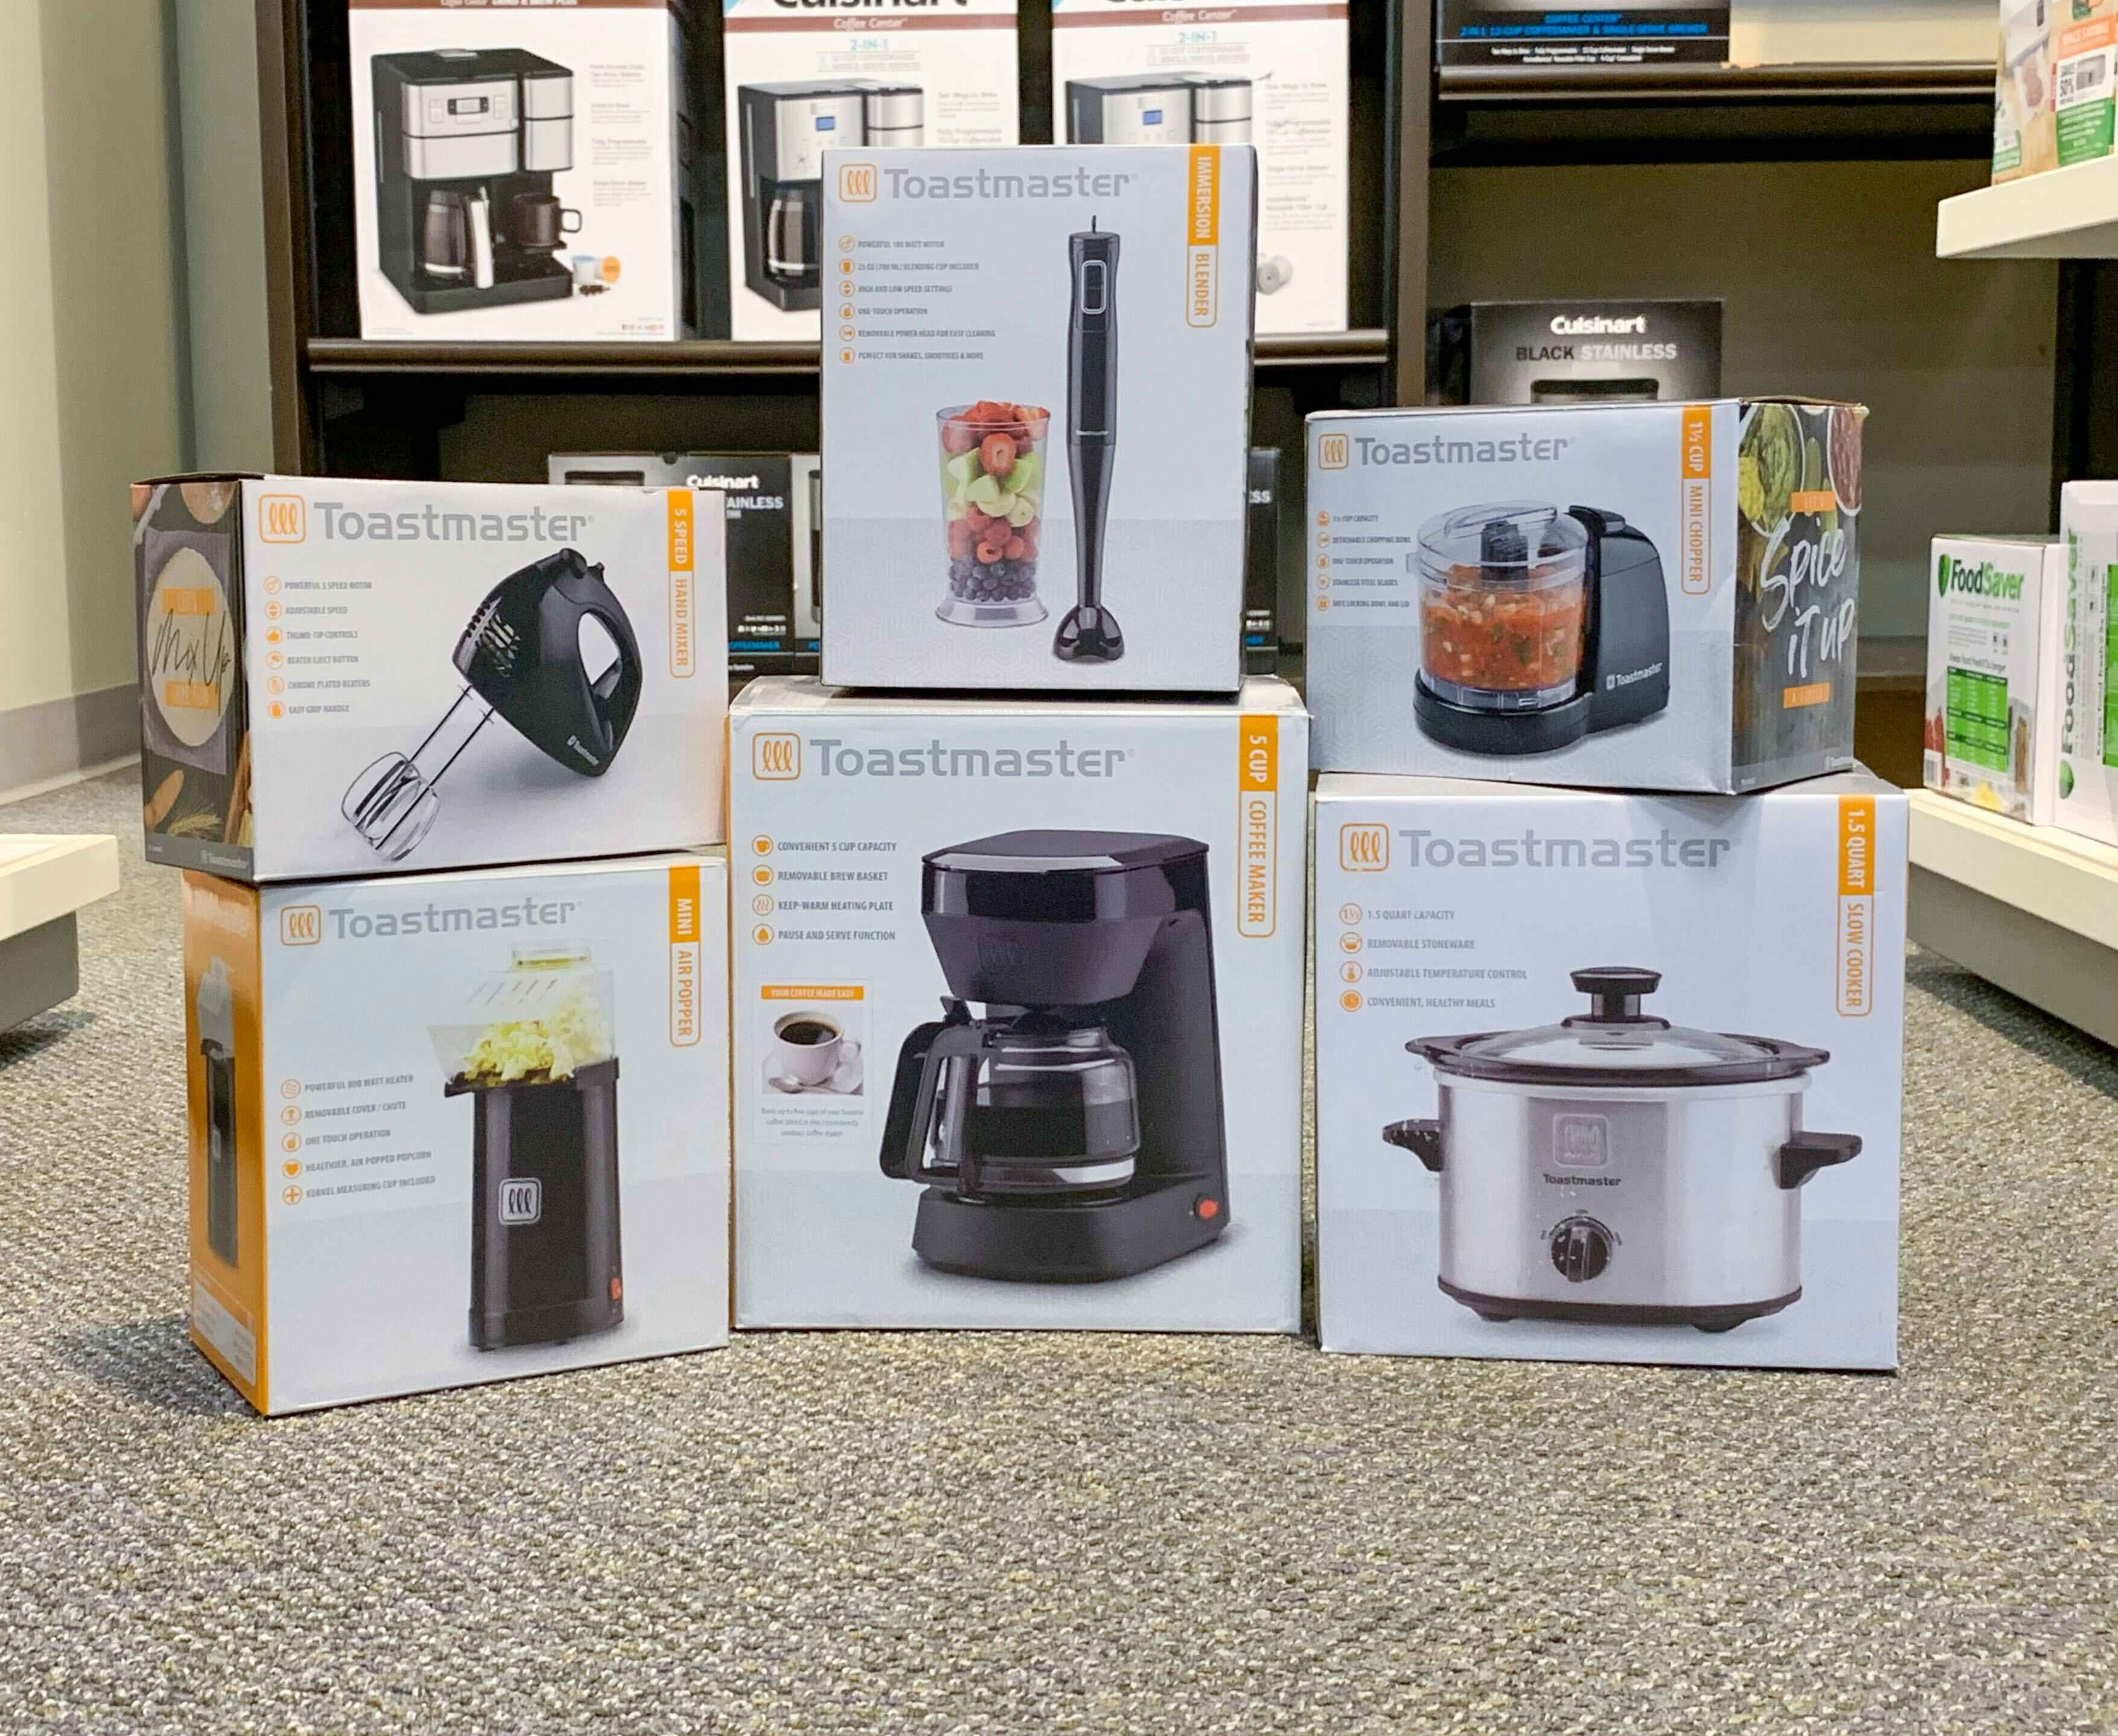 kohls toastmaster appliances in store image 2021 uo